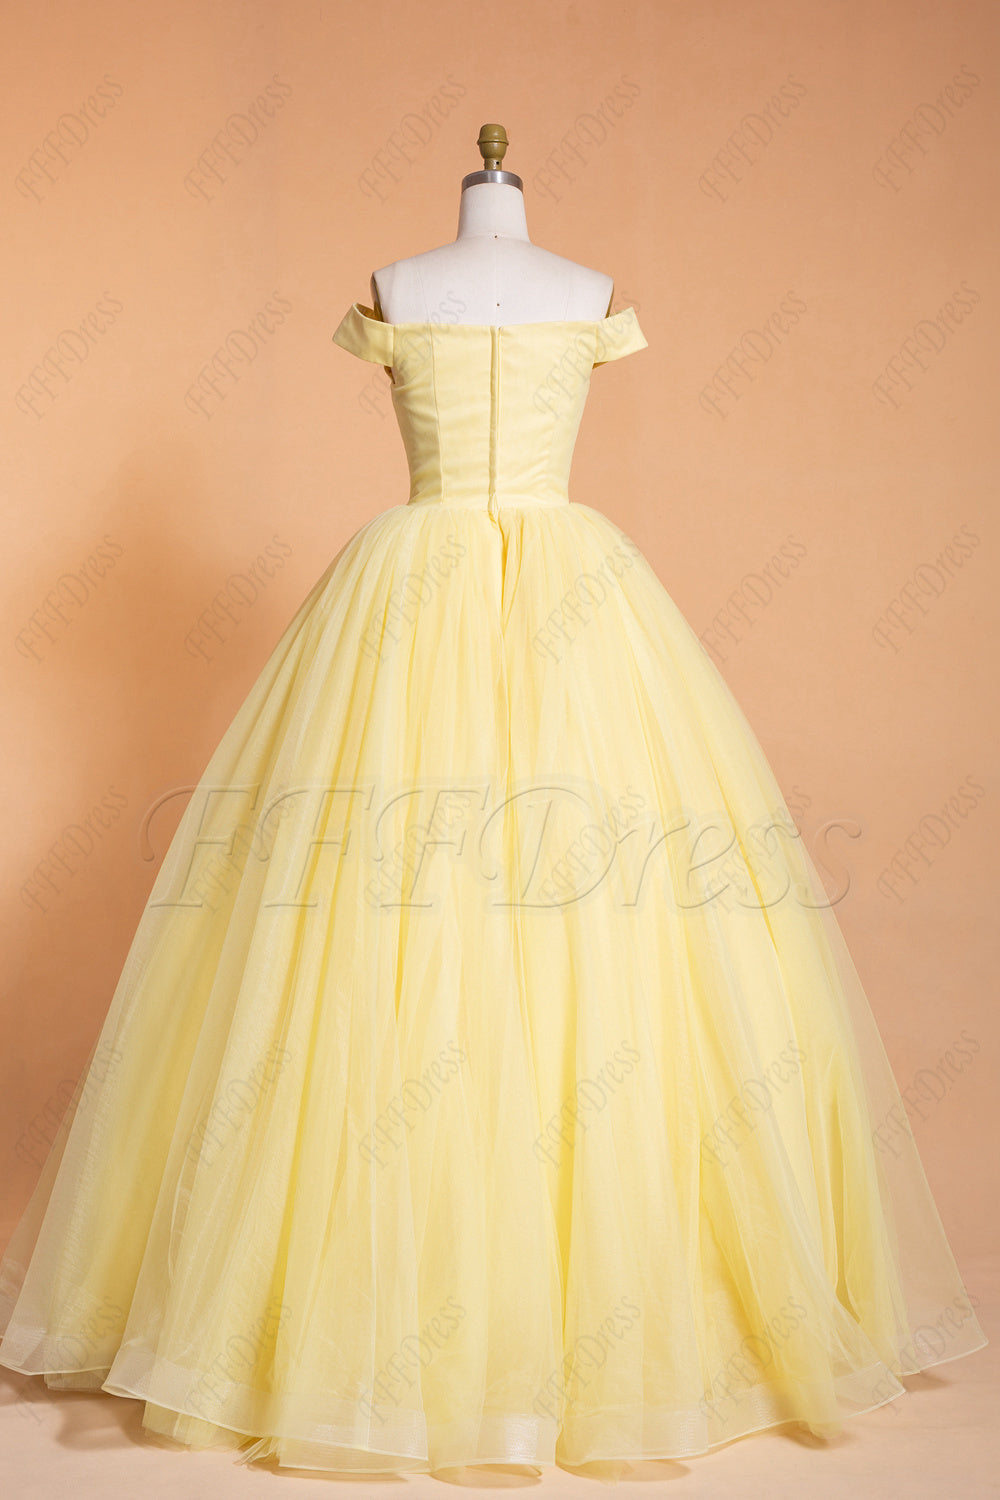 Off the shoulder yellow vintage ball gown prom dresses long